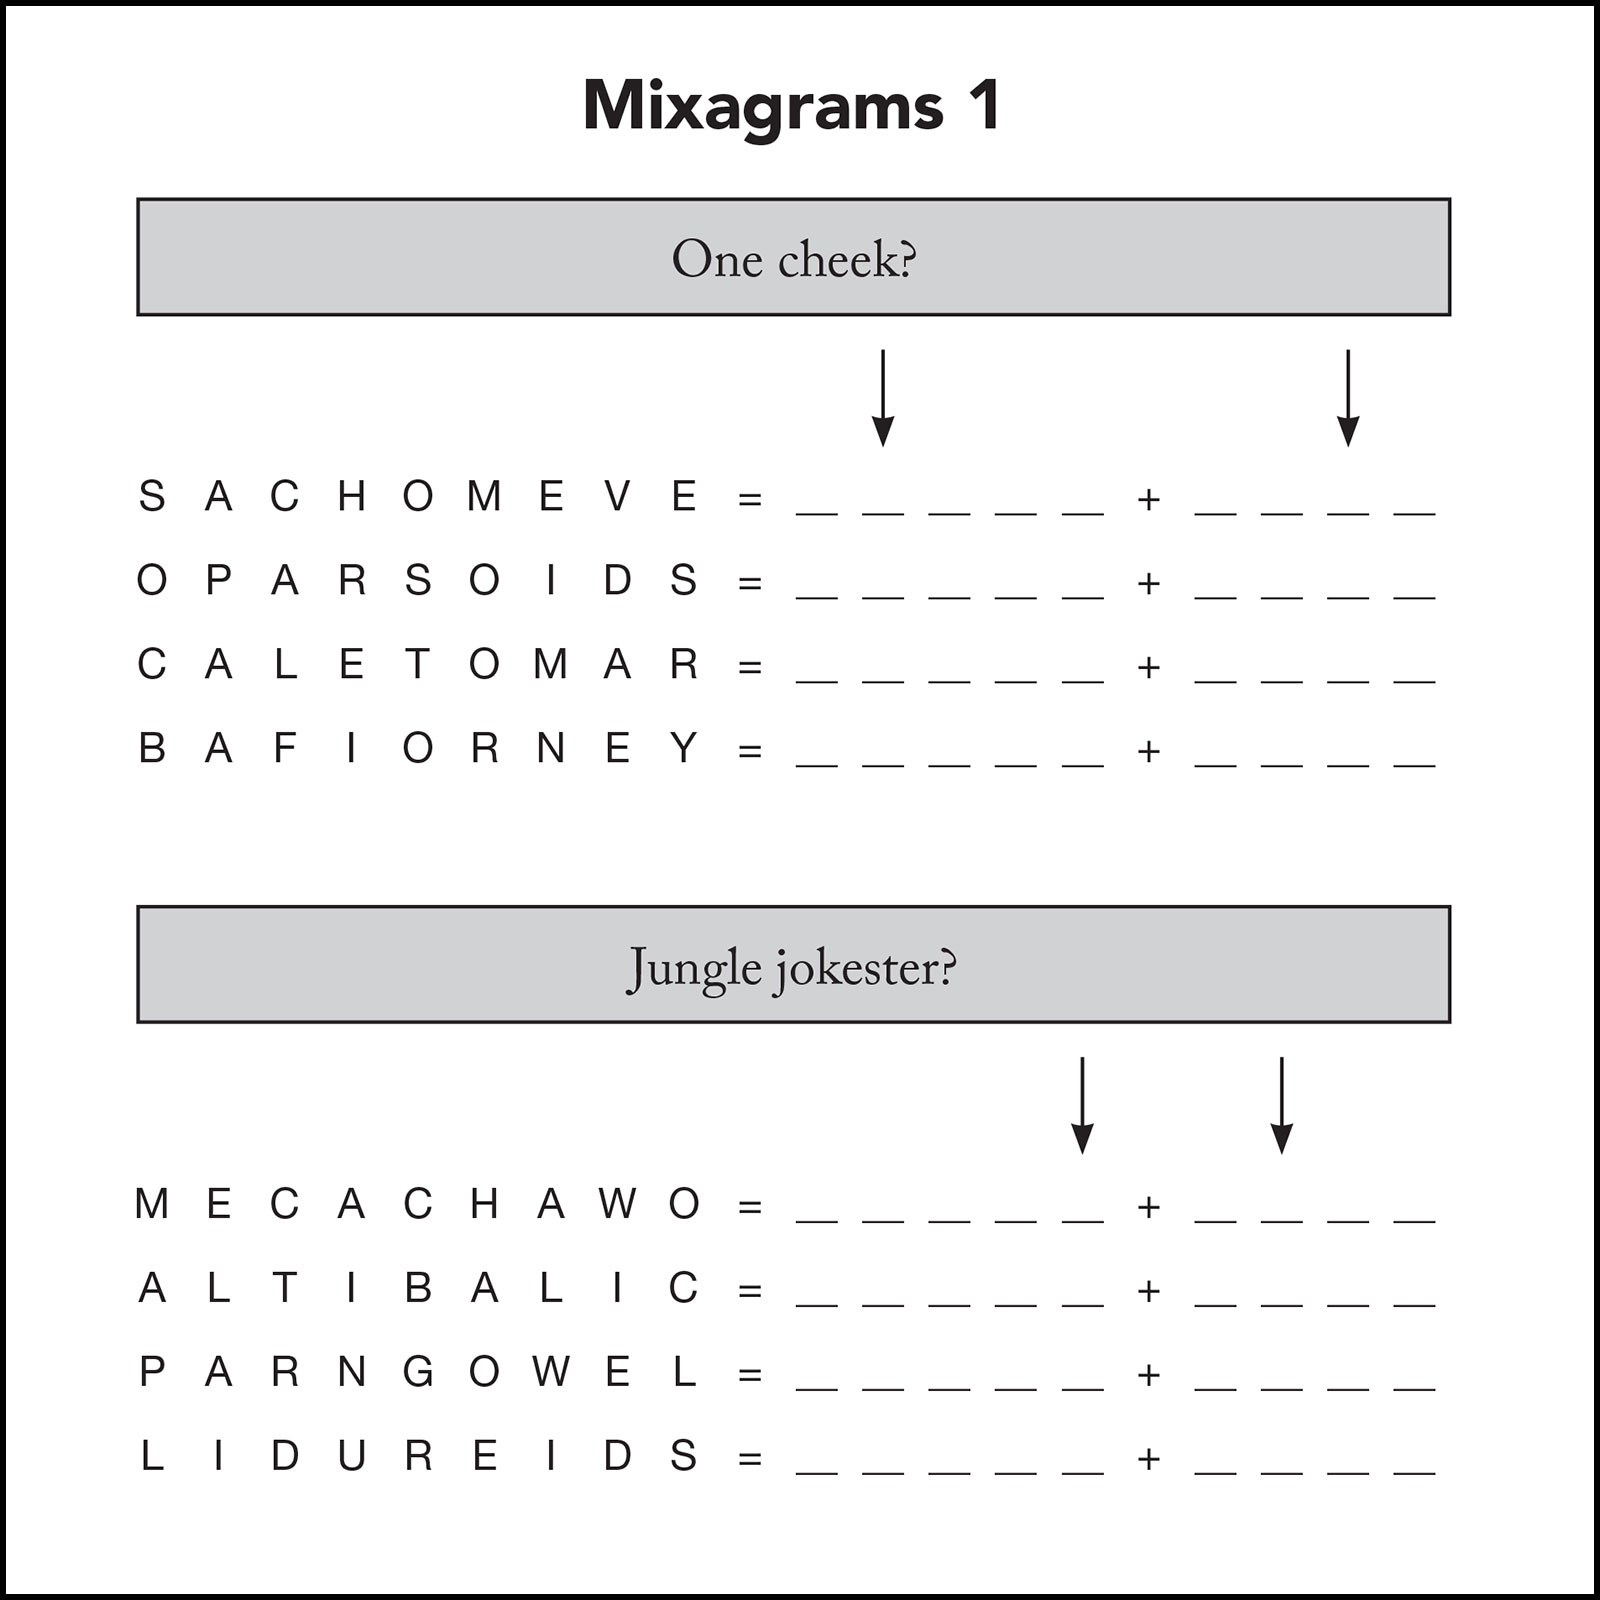 Two samples of Mixagrams puzzles